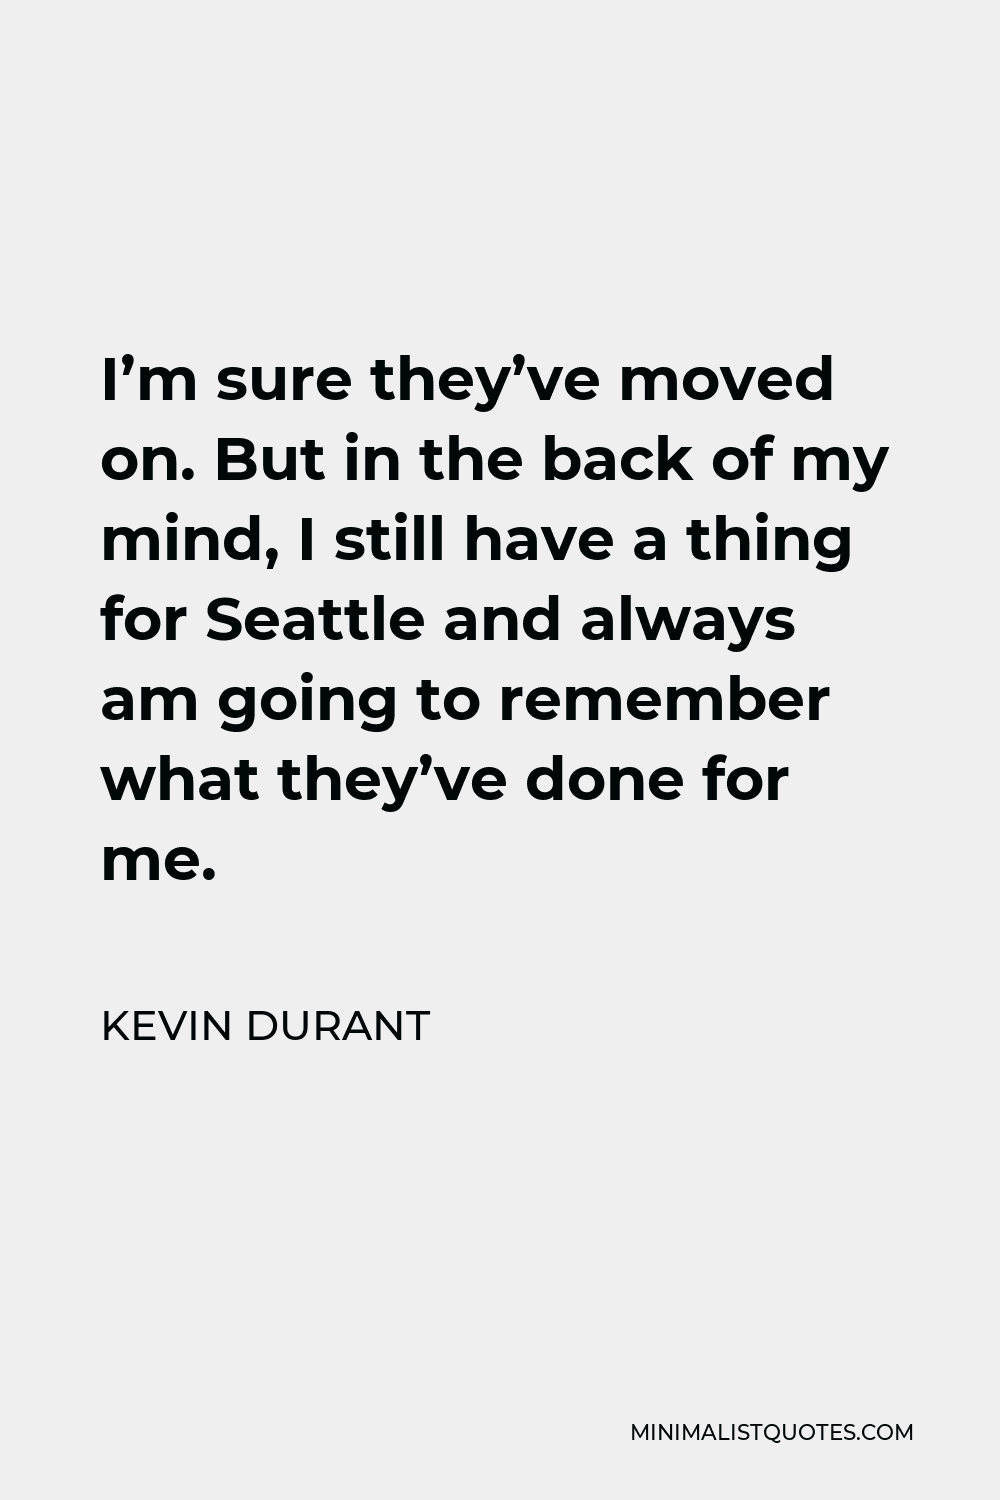 Kevin Durant Quote - I’m sure they’ve moved on. But in the back of my mind, I still have a thing for Seattle and always am going to remember what they’ve done for me.